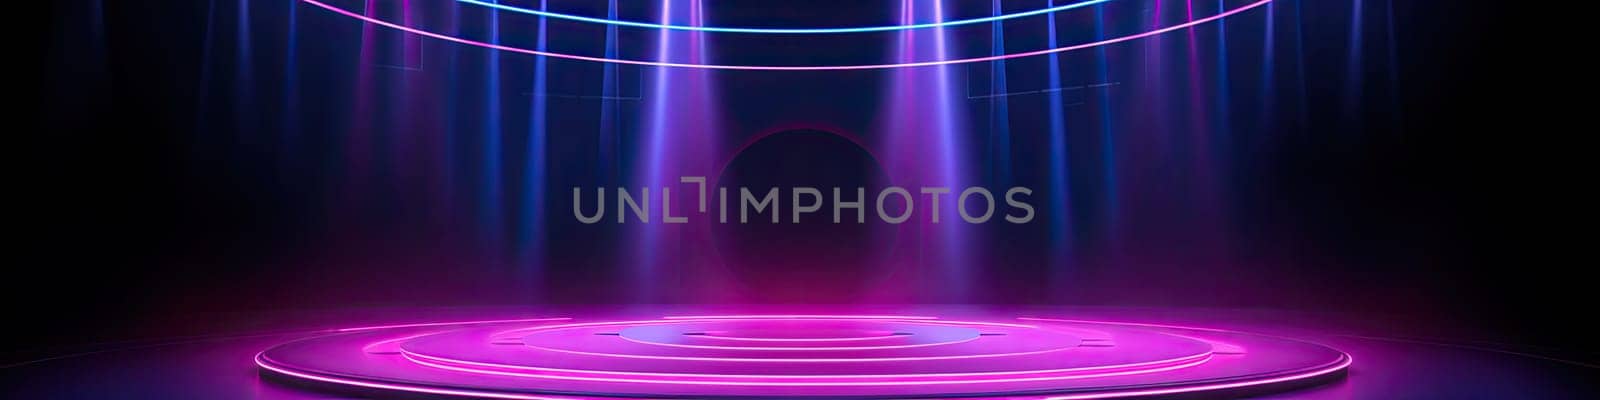 The dark stage show empty dark blue purple pink background with a neon light, clear stand by Kadula